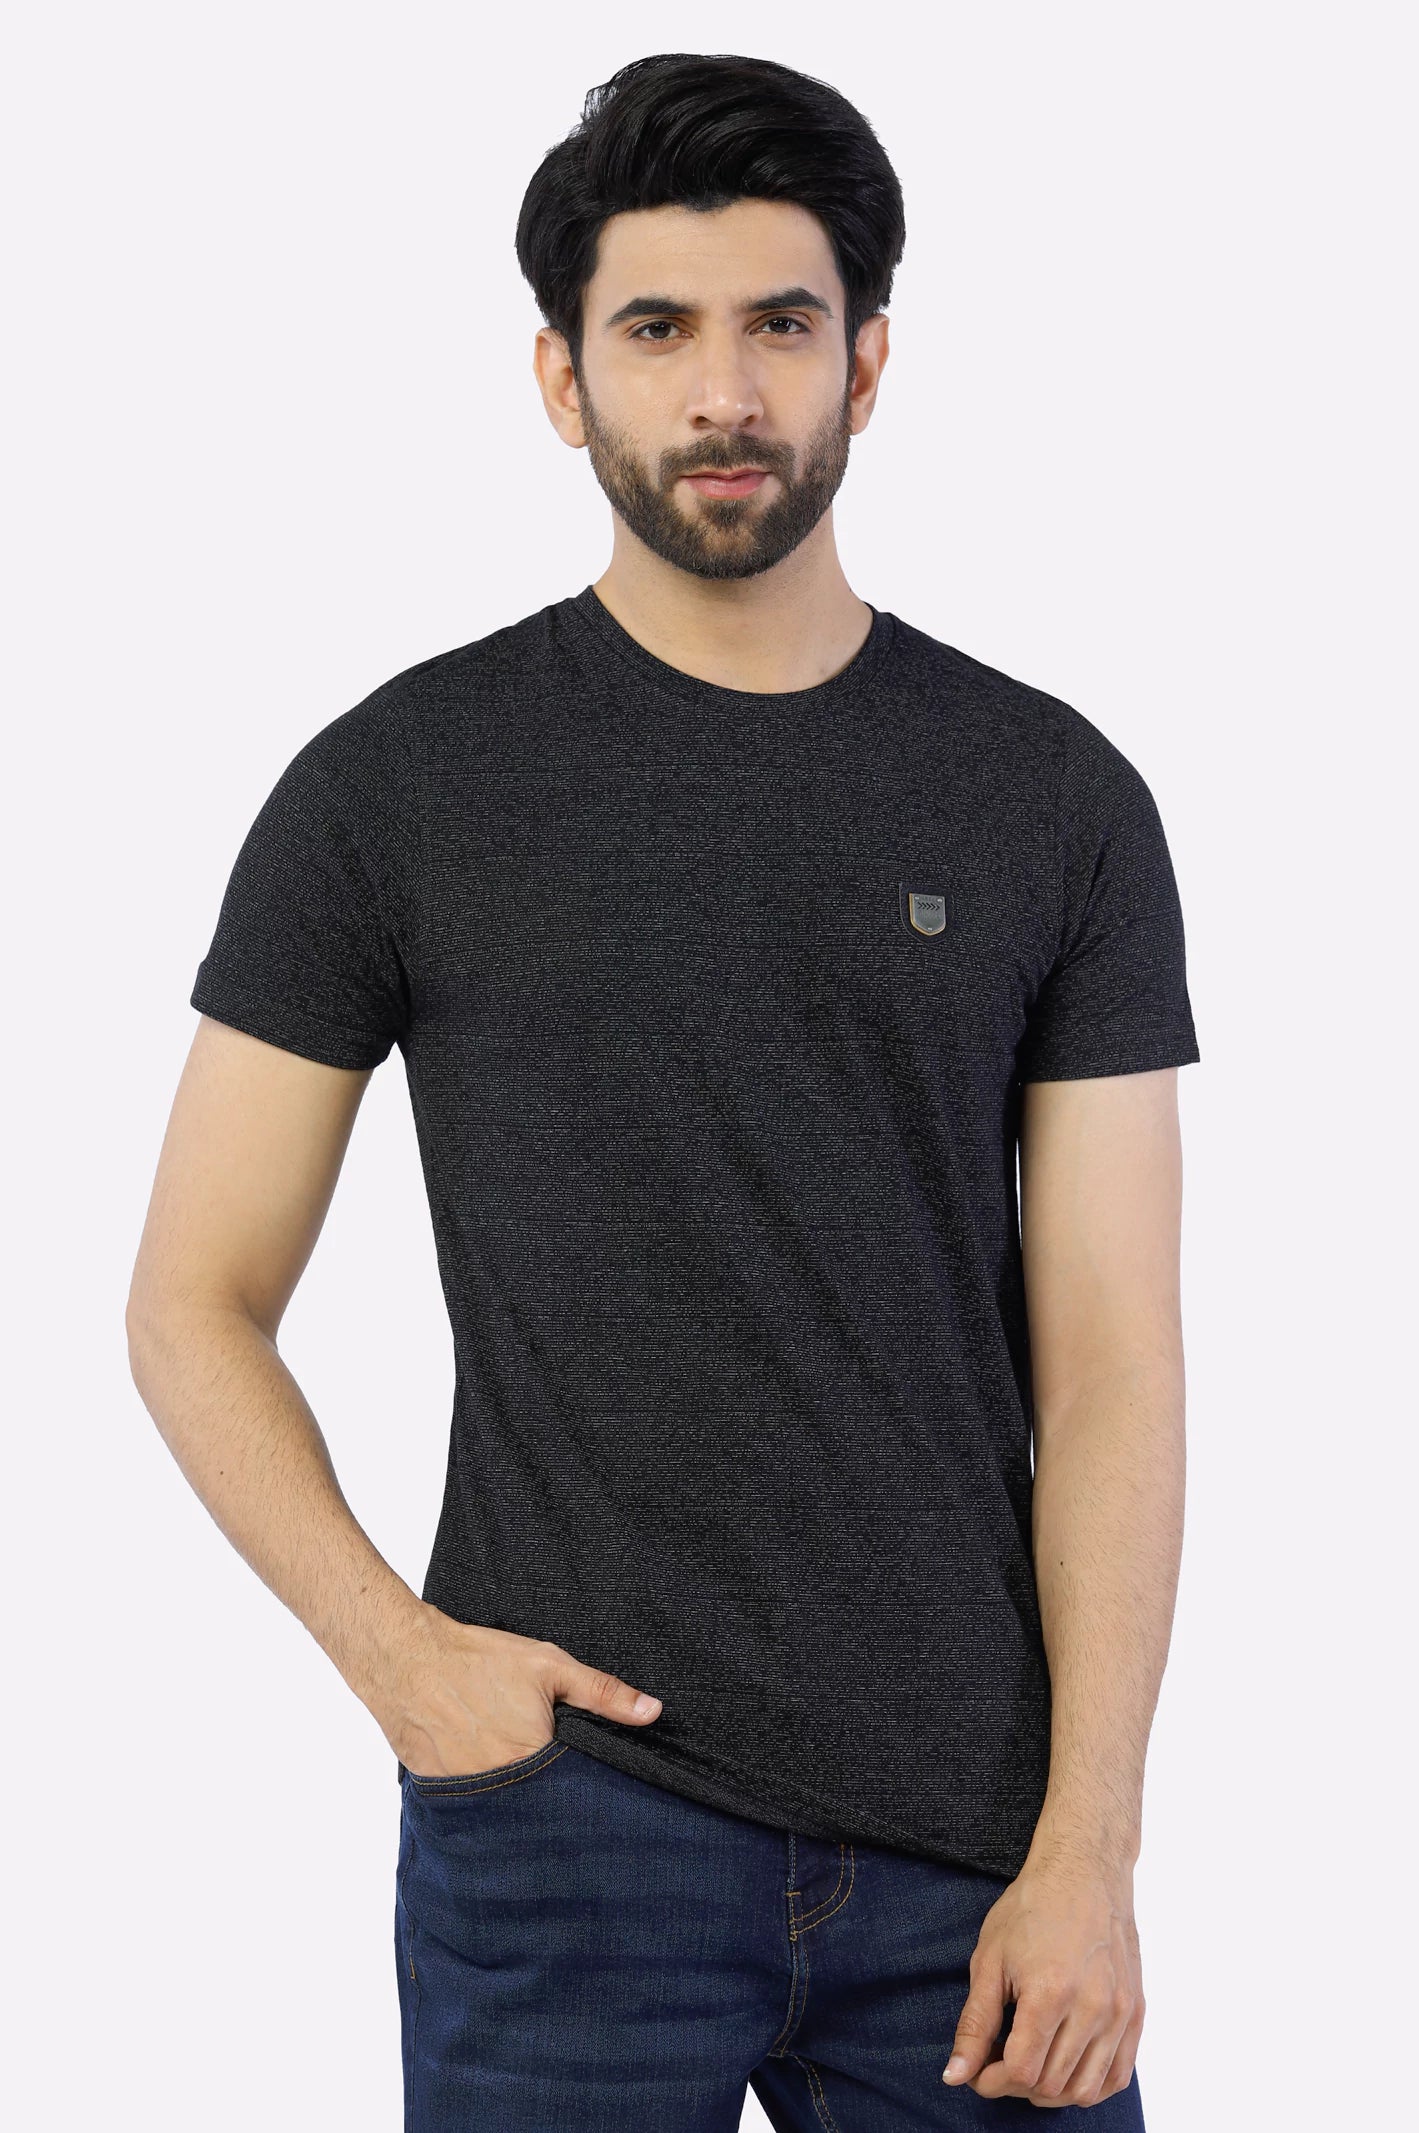 Black Basic Crew Neck T-Shirt From Diners